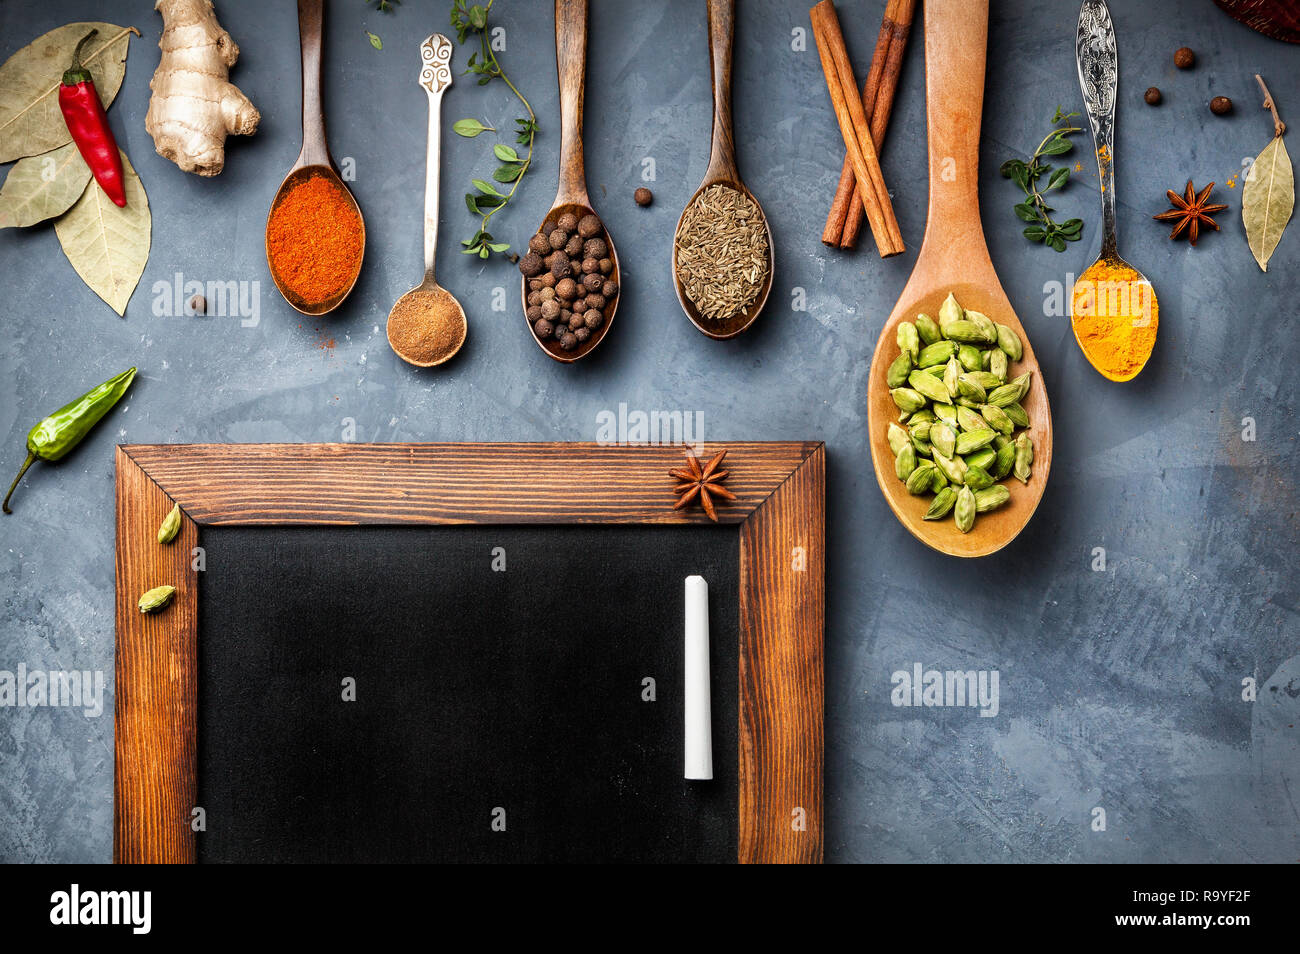 Various Spices like turmeric, cardamom, chili, ginger, star anise and cinnamon near blackboard on grunge background. Free space for your text Stock Photo